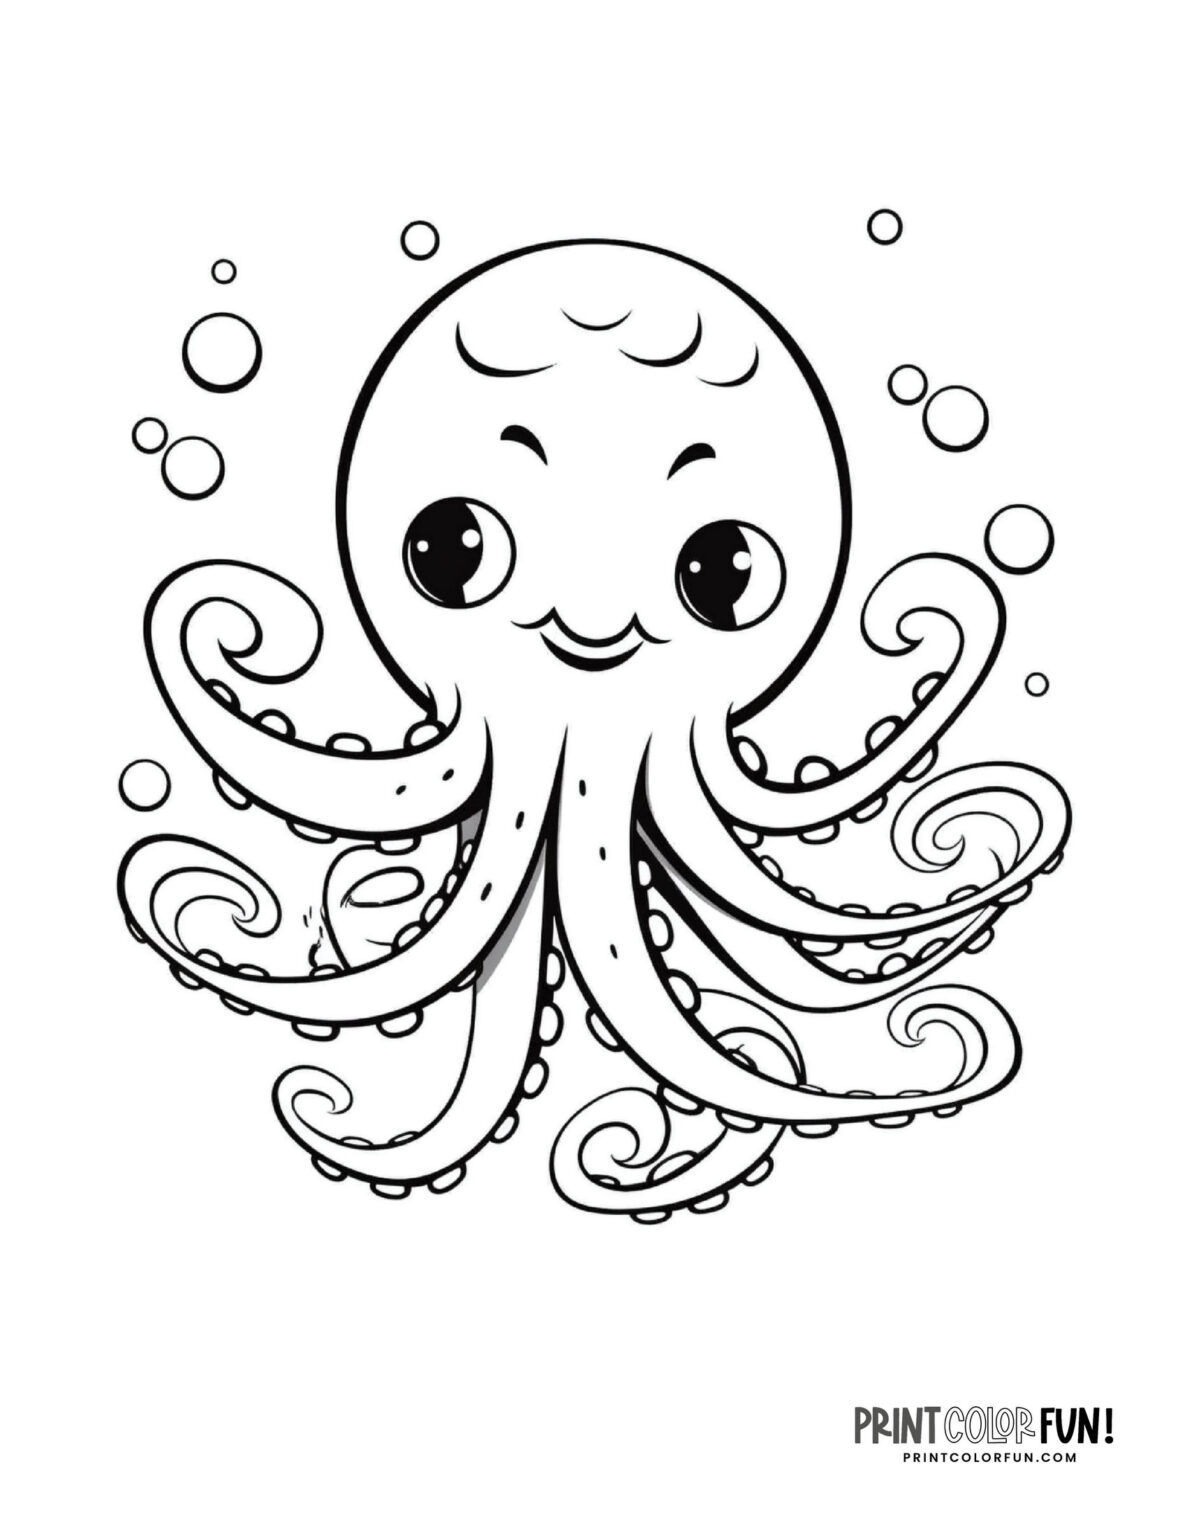 15 octopus drawings & clipart: Make waves with these fun craft ...